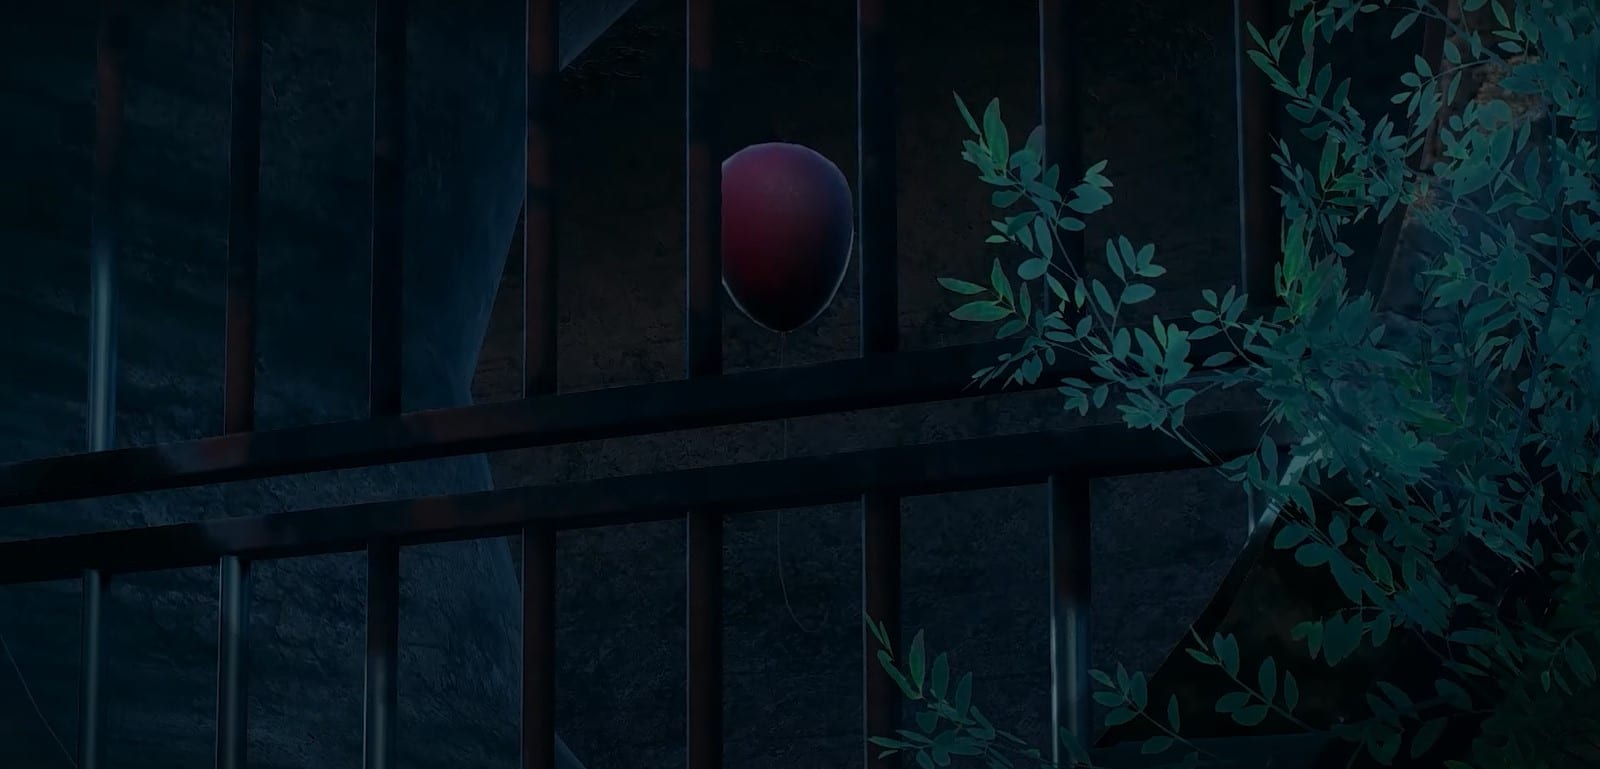 Pennywise's Red Balloon from IT